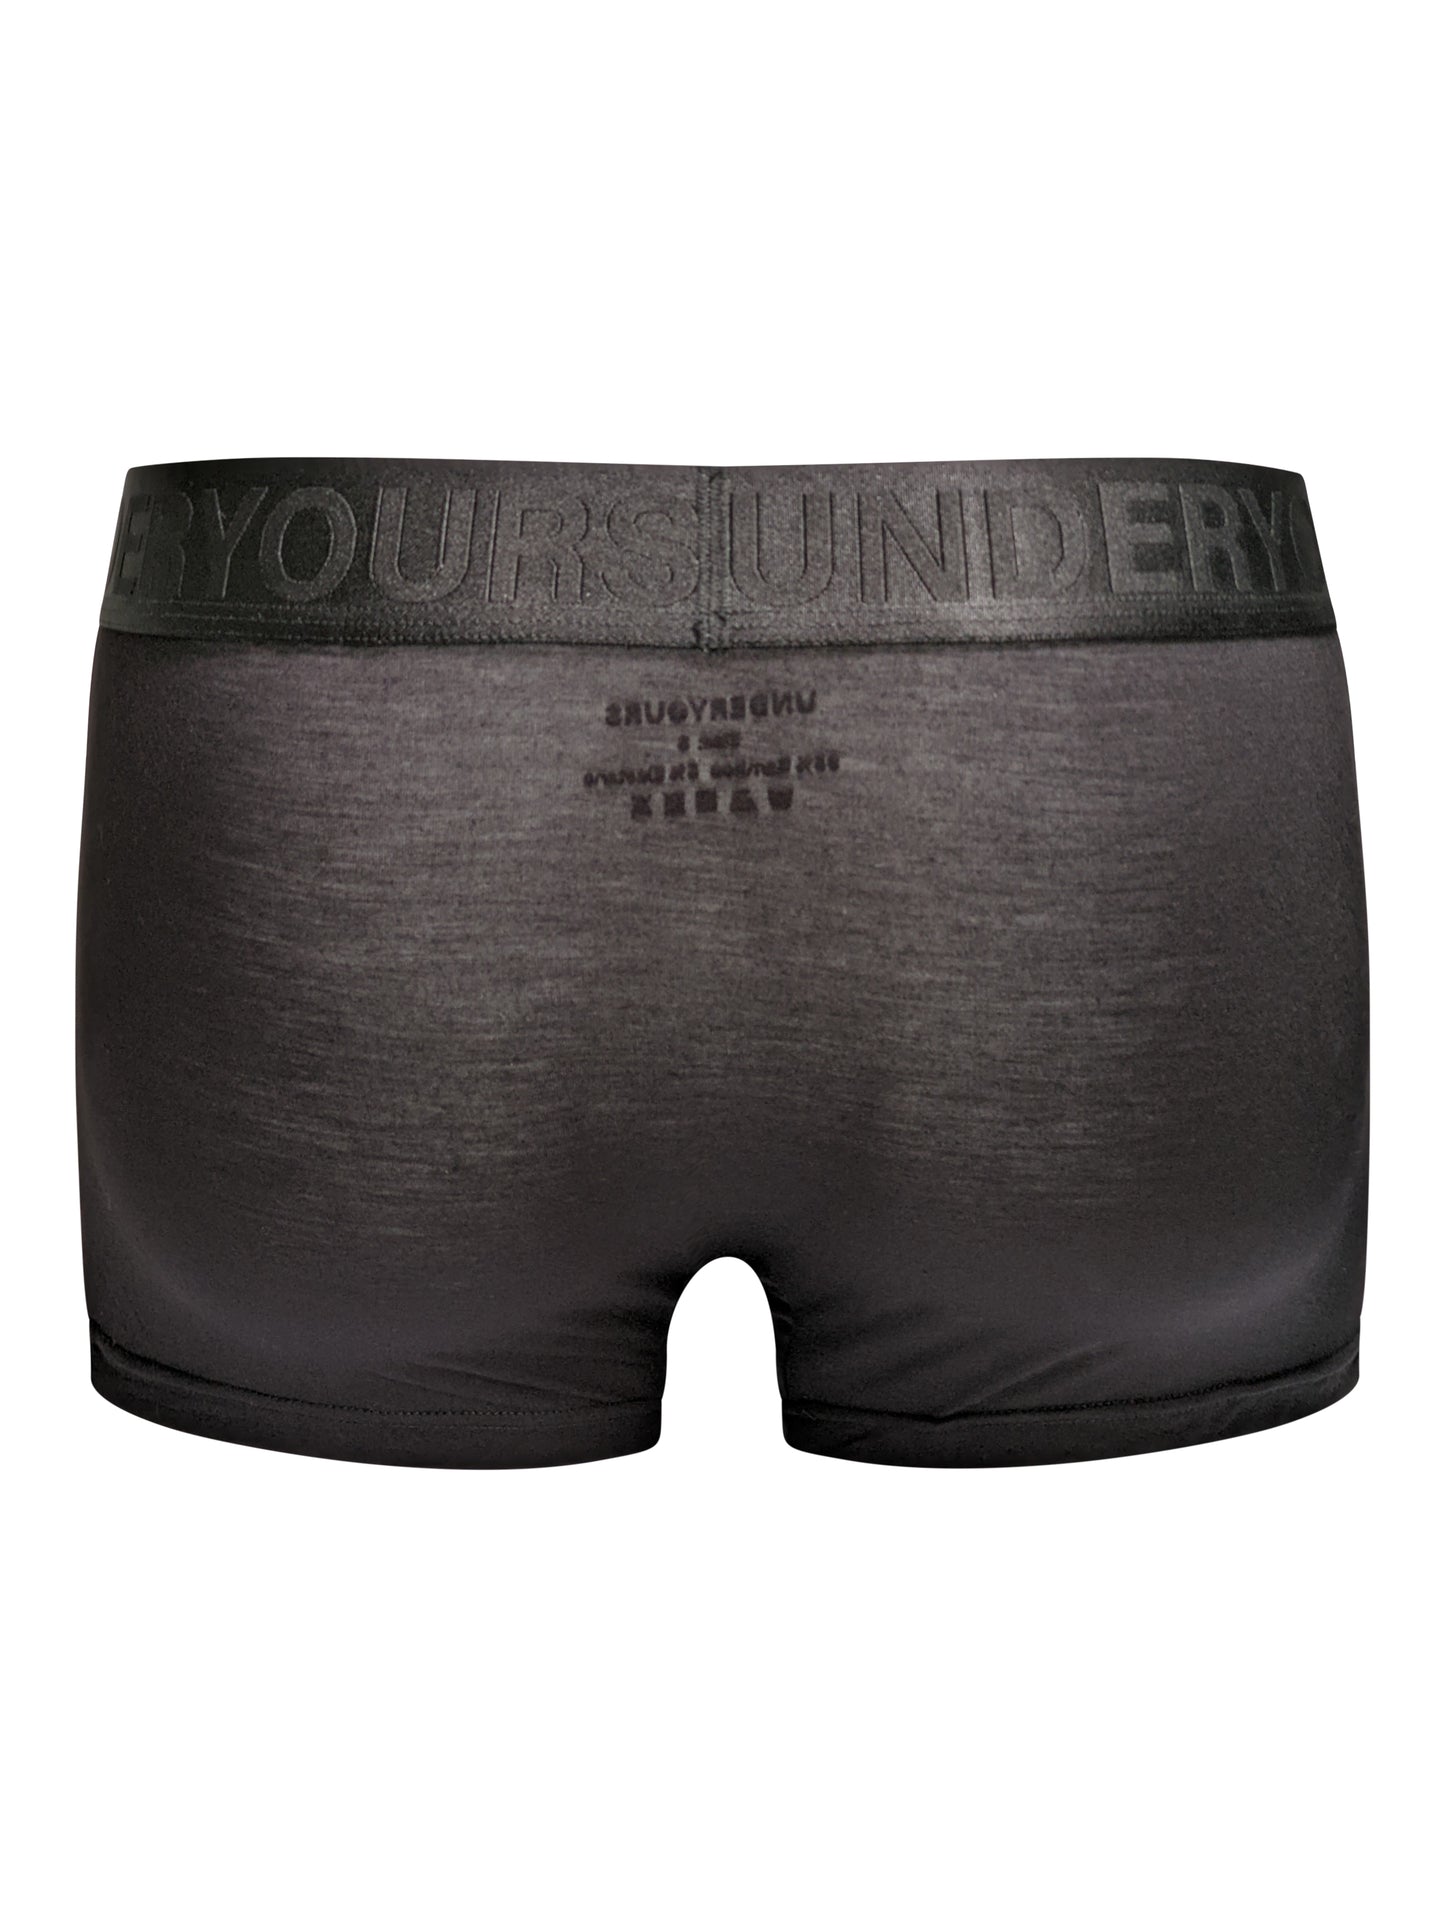 UnderYours Comfort Bamboo Boxer Shorts 3 Pack